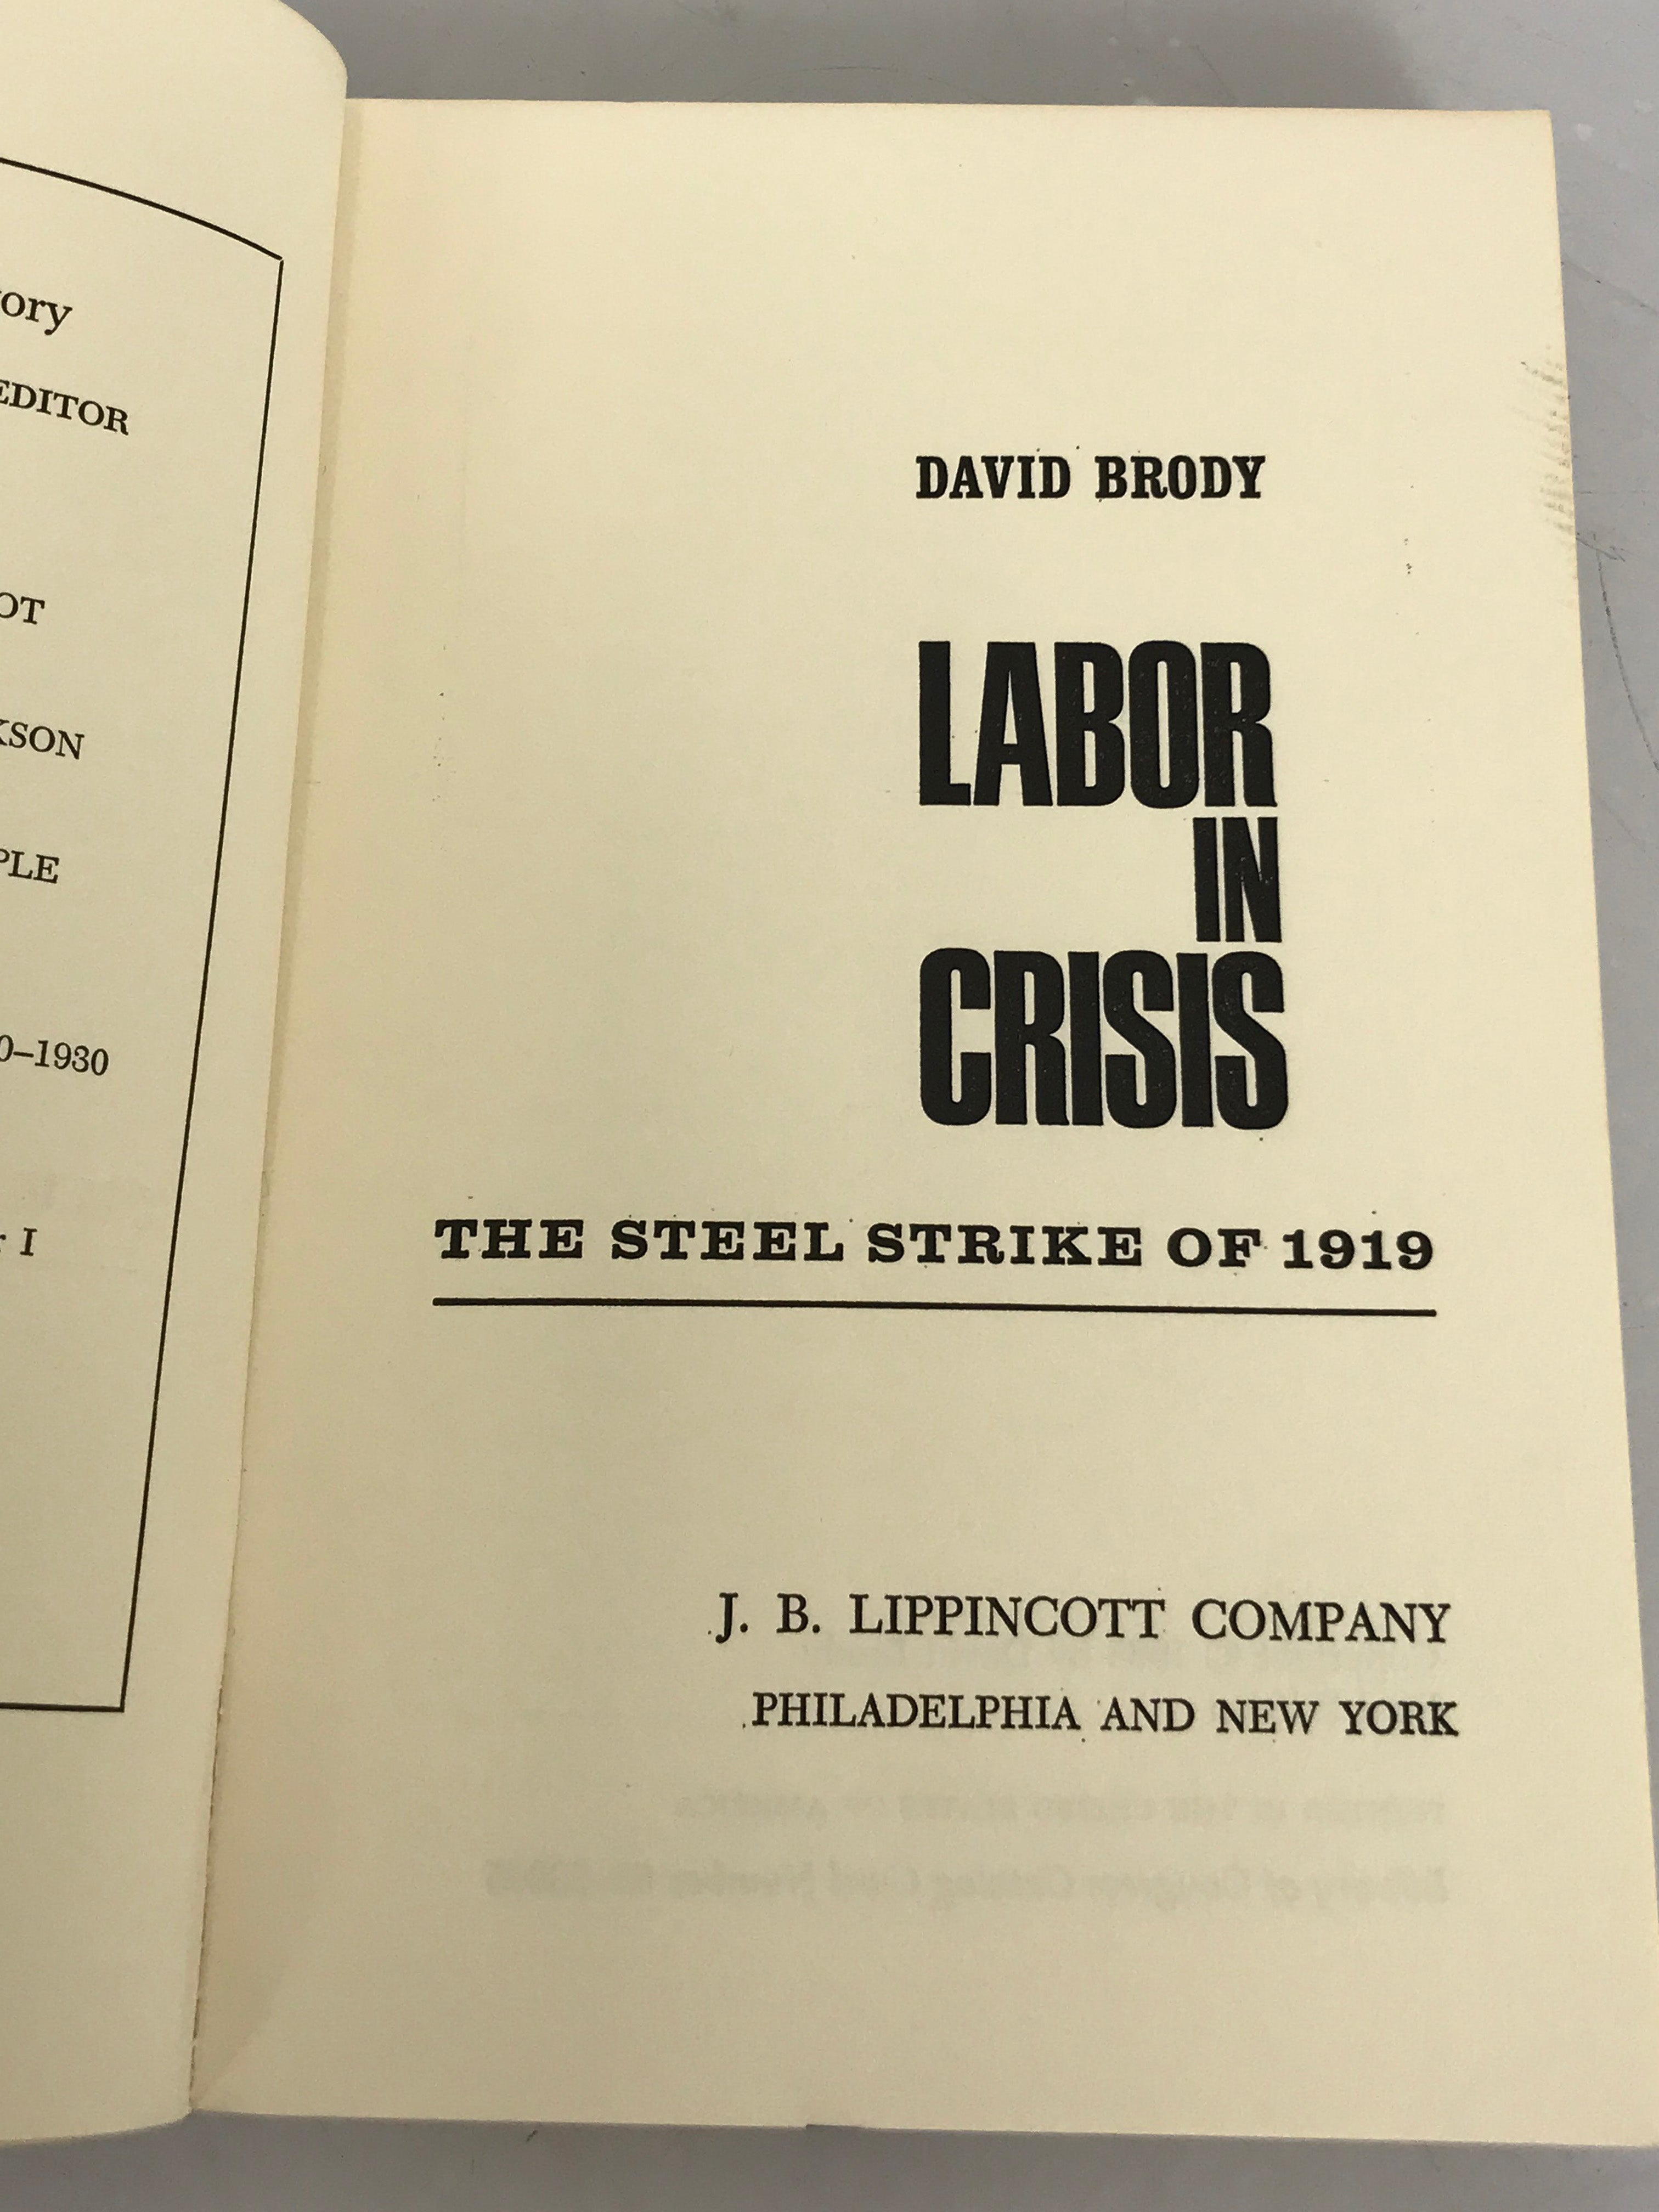 Lot of 2 David Brody Books: The American Labor Movement (1971) and Labor In Crisis the Steel Strike of 1919 (First Edition, 1965) SC